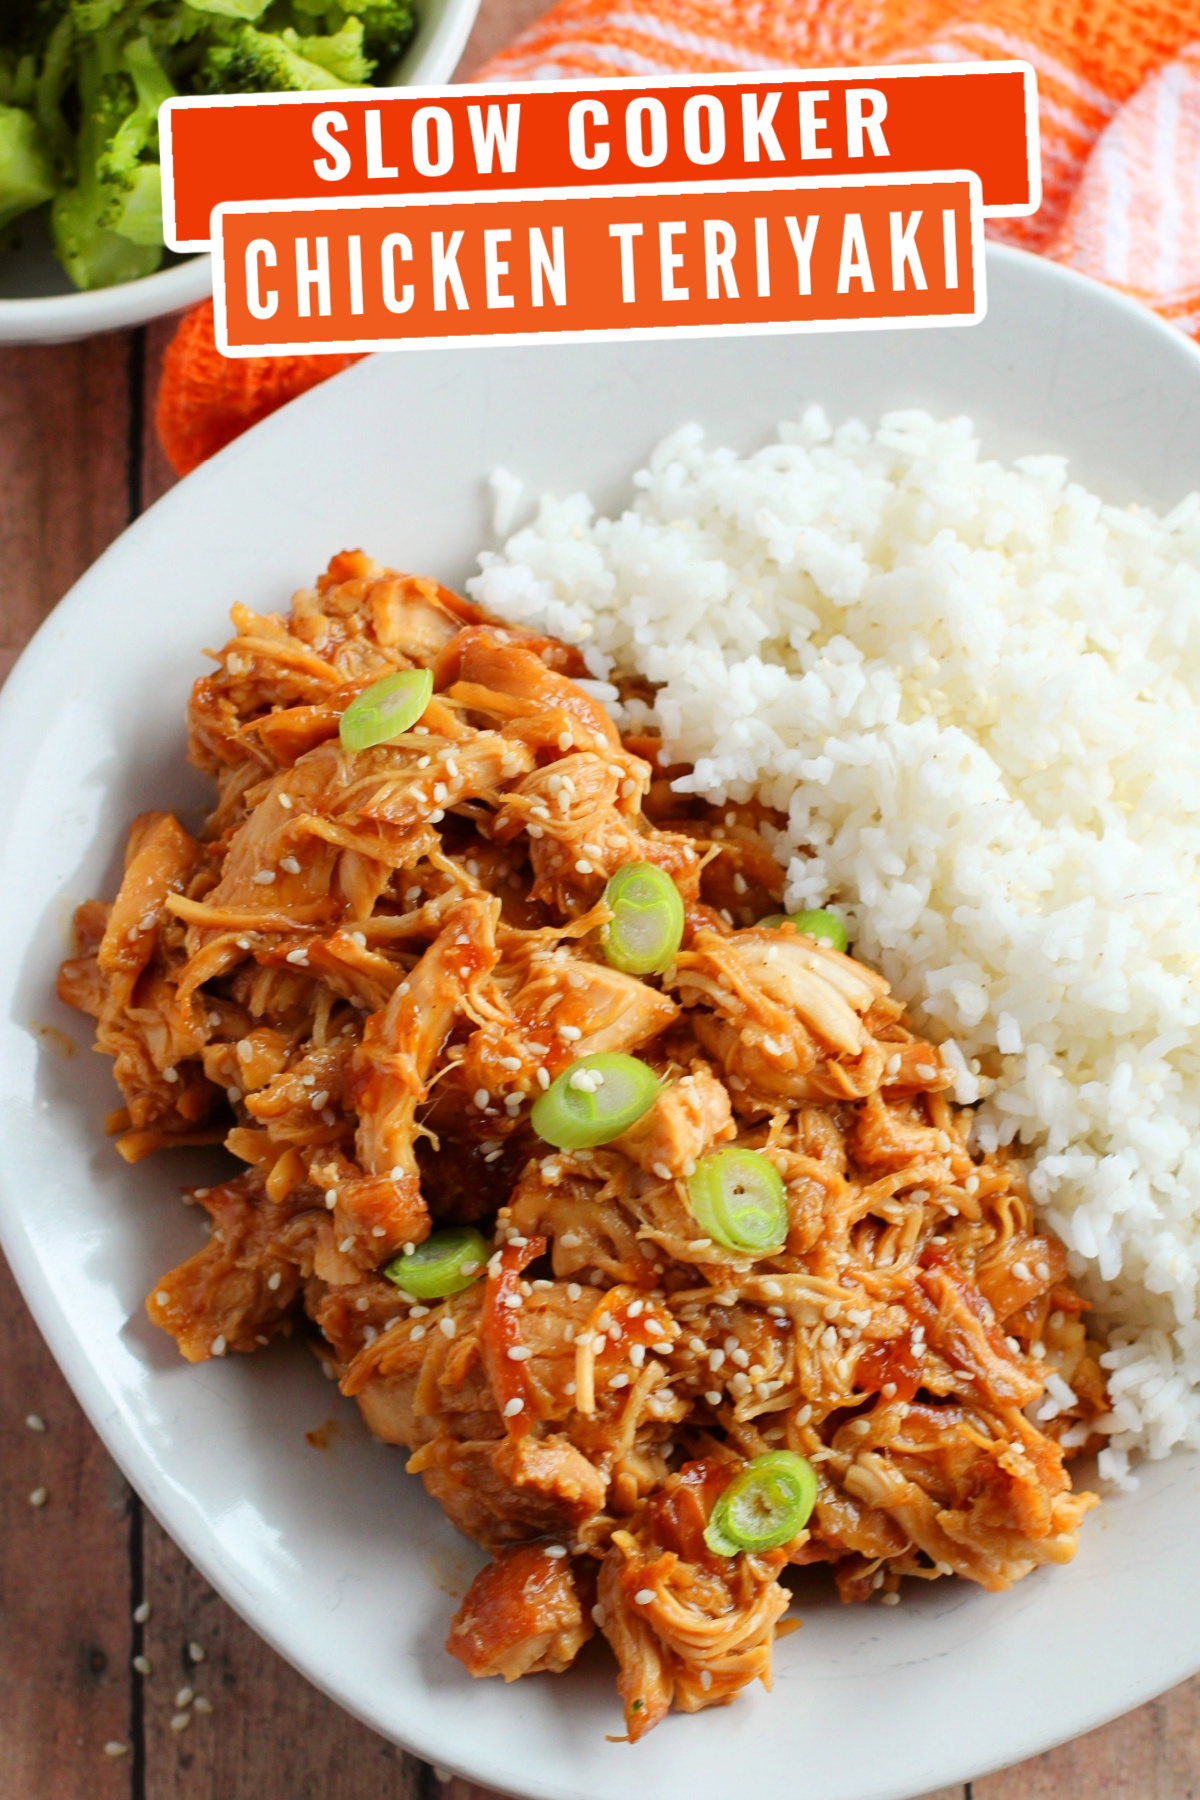 This slow cooker chicken teriyaki is an easy weeknight meal to throw together in the morning, for a tasty dinner ready at the end of the day.